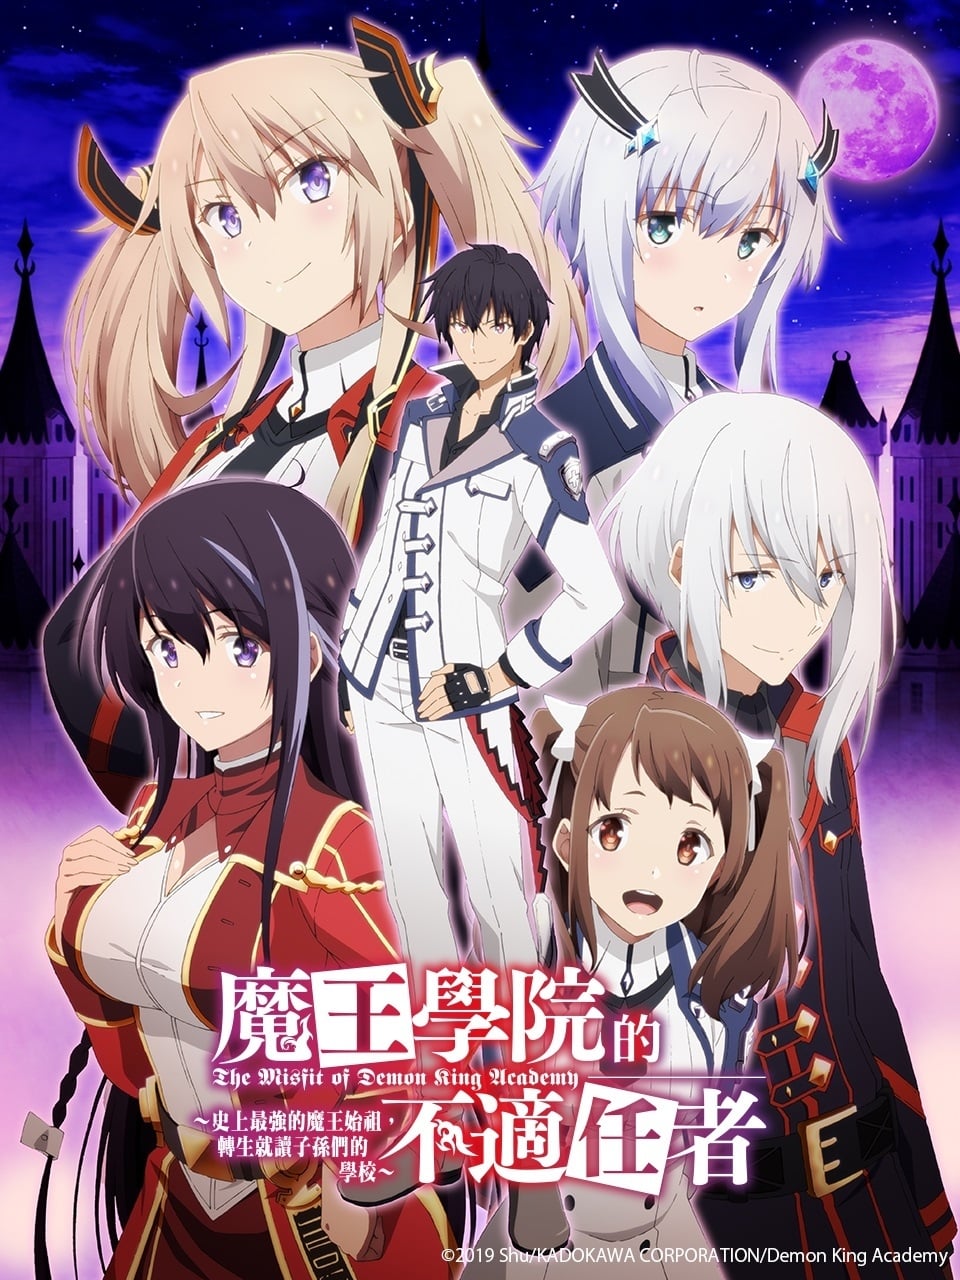 The Misfit of Demon King Academy Episode 12 English SUB 